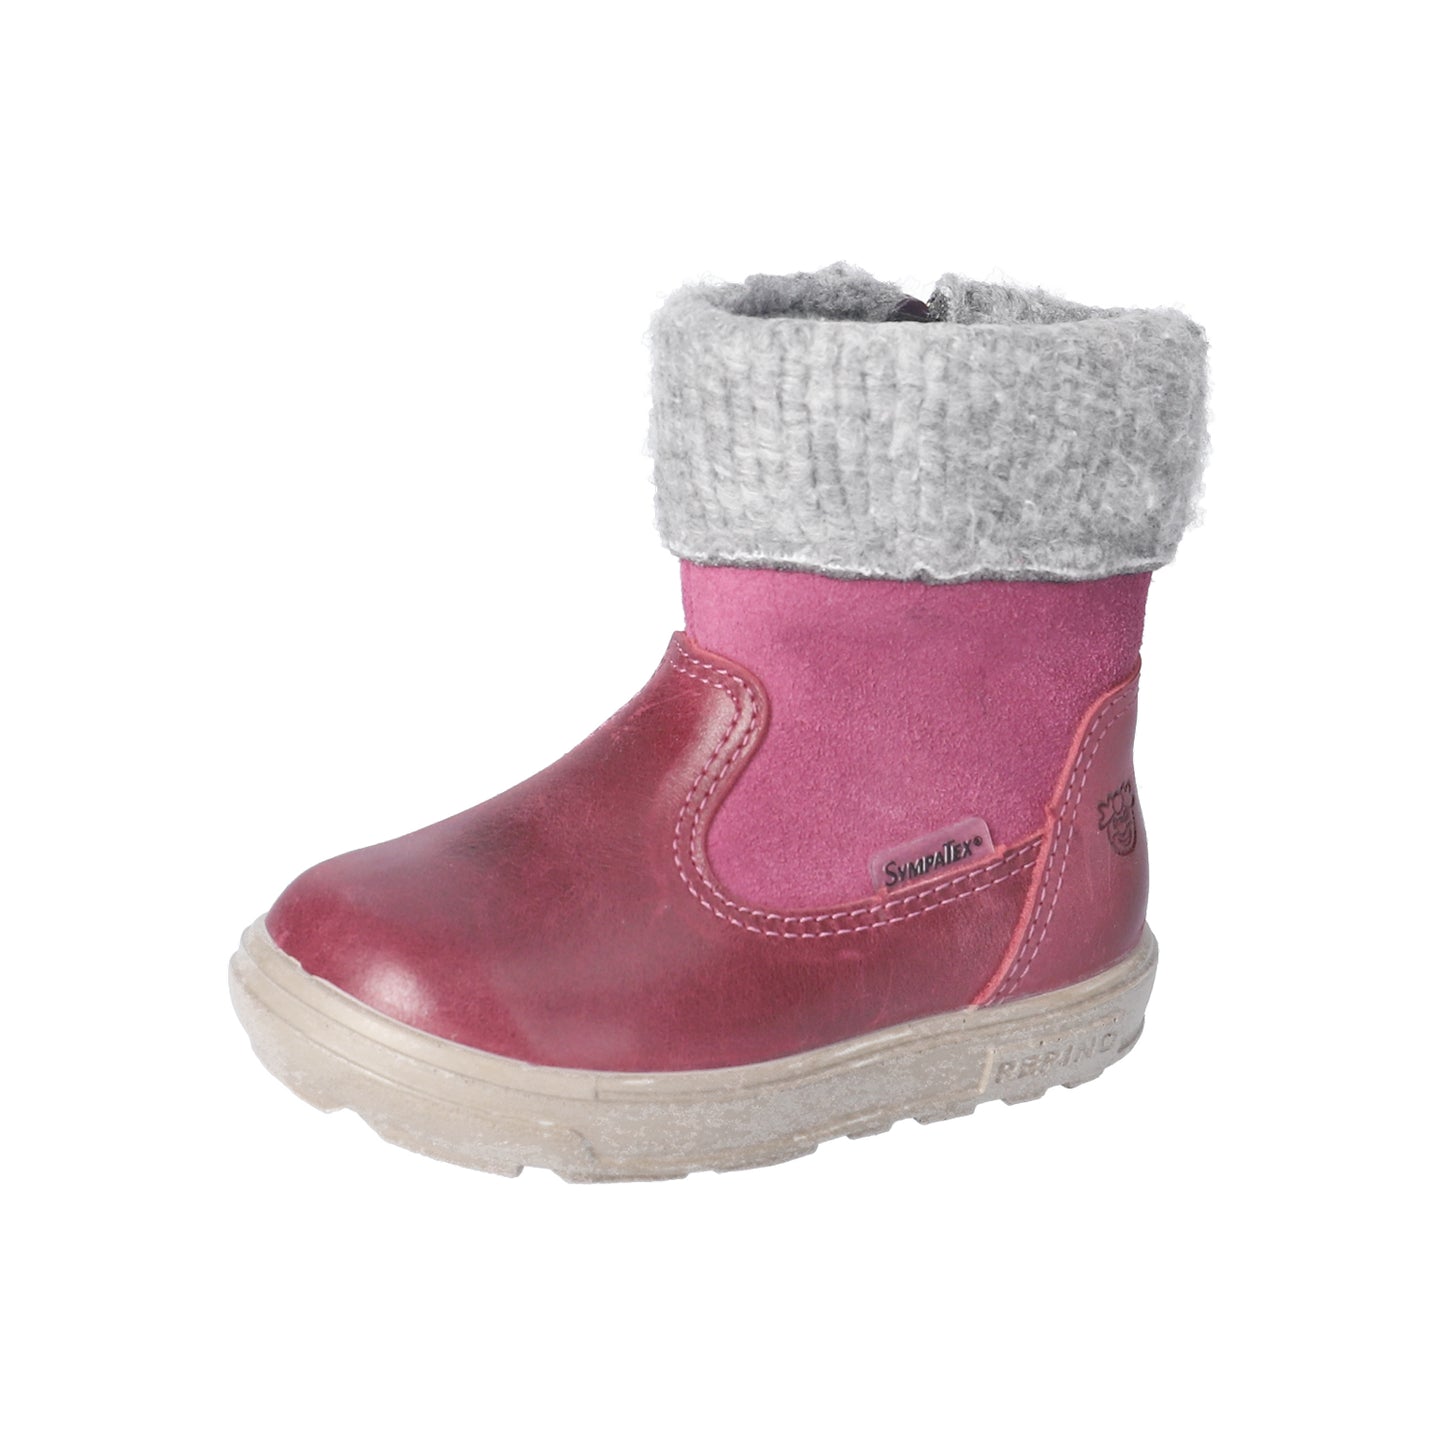 Jiminy Waterproof And Warm Lined Leather Boot in Merlot